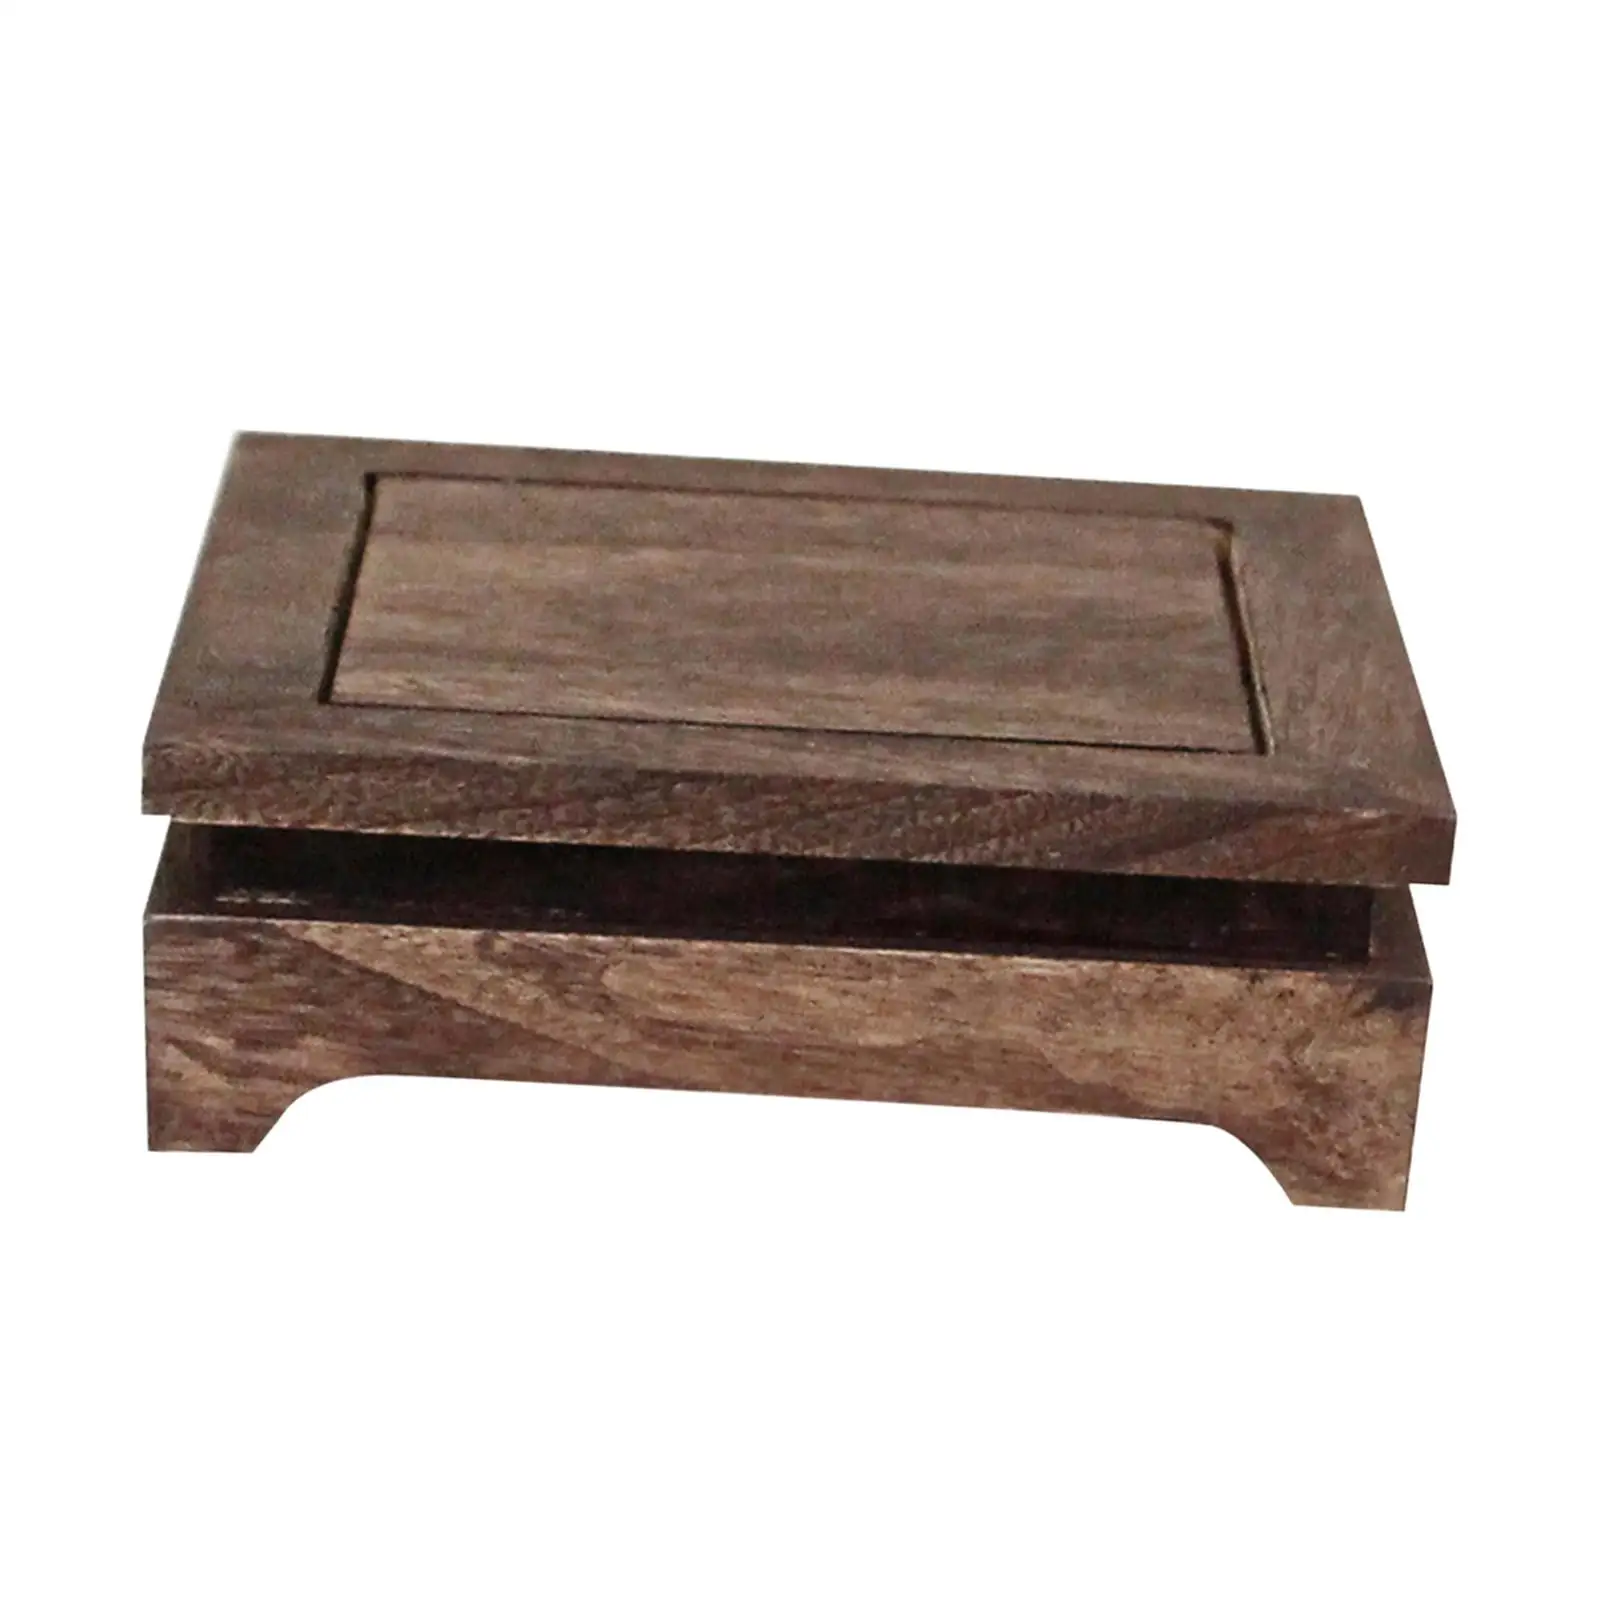 Rectangular Base for Collectibles Fishbowl Stand Figurine Teapot Base Ornament Wooden Display Stand Decorative Base 4cm Height